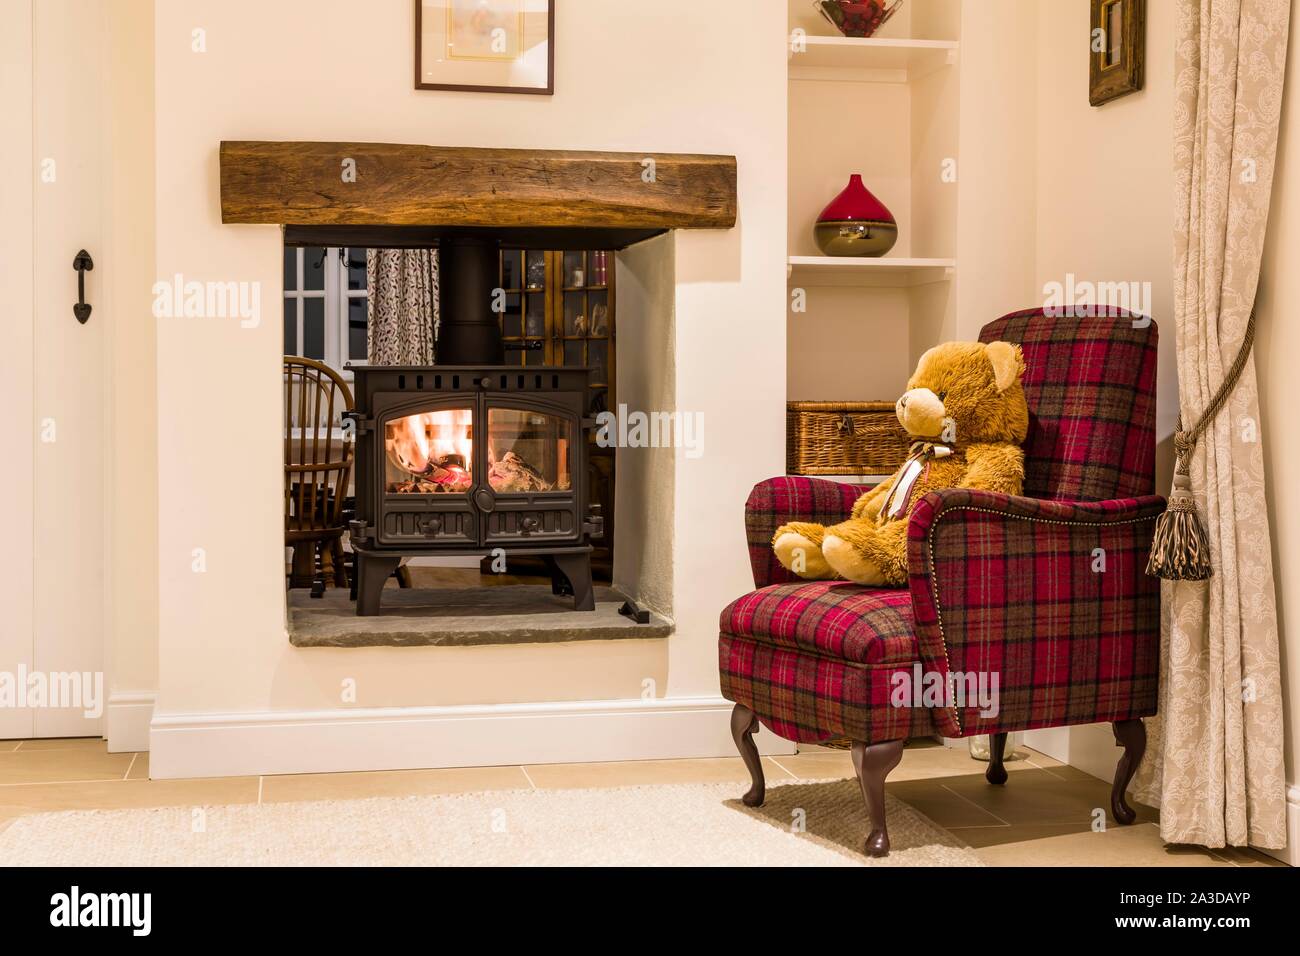 Cosy fireplace with wood burning stove and teddy bear in a living room home interior, UK Stock Photo